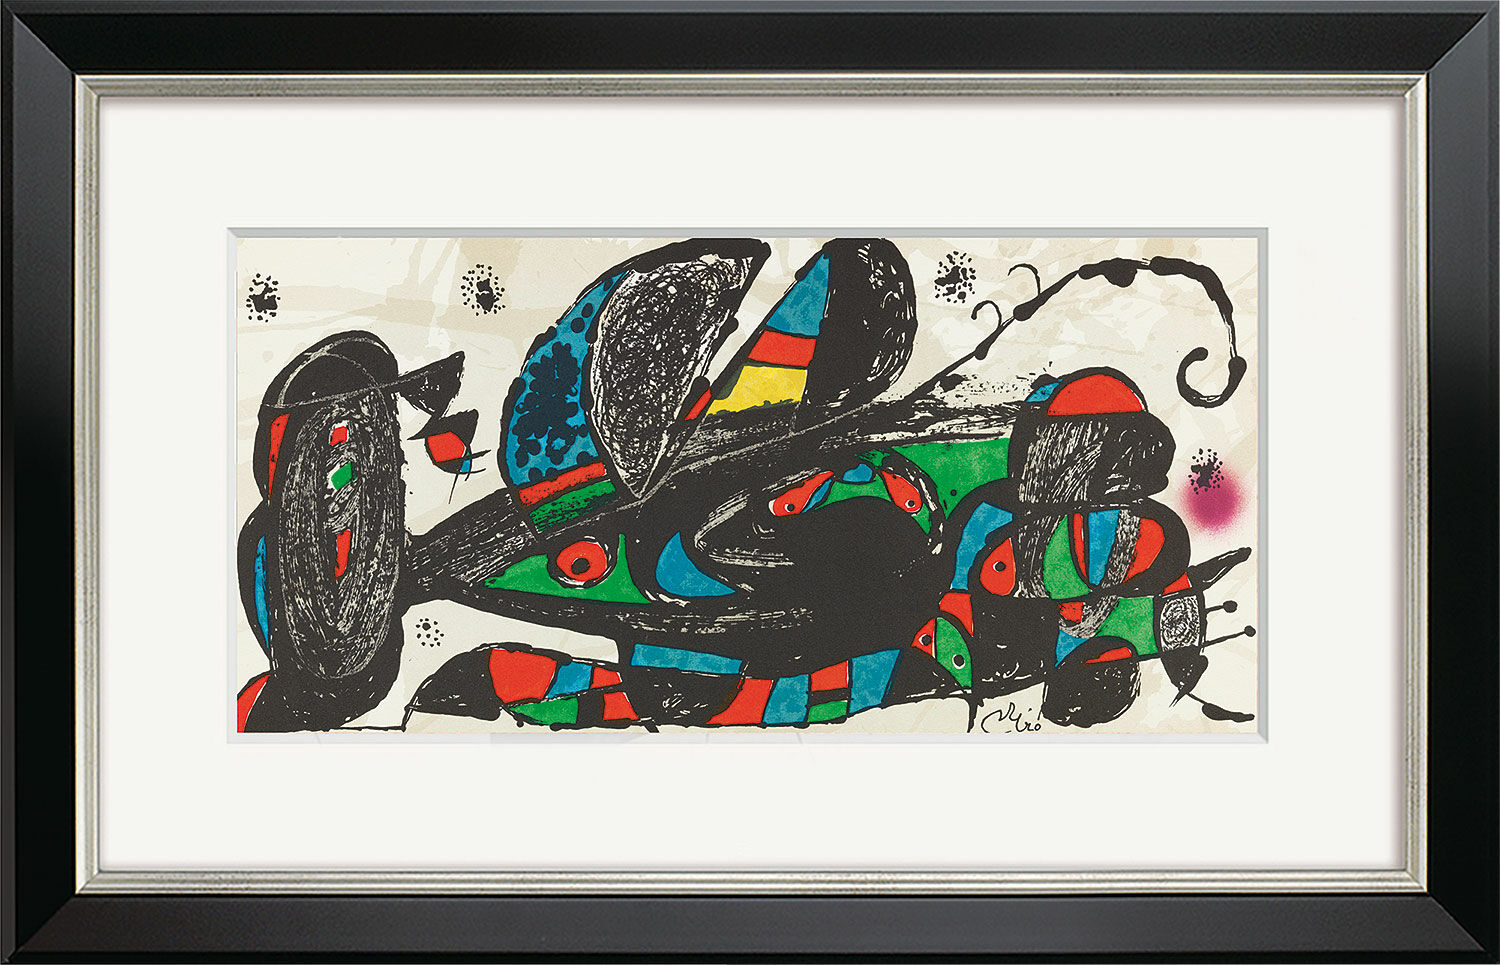 Picture "Escultor Iran" (1974), framed by Joan Miró